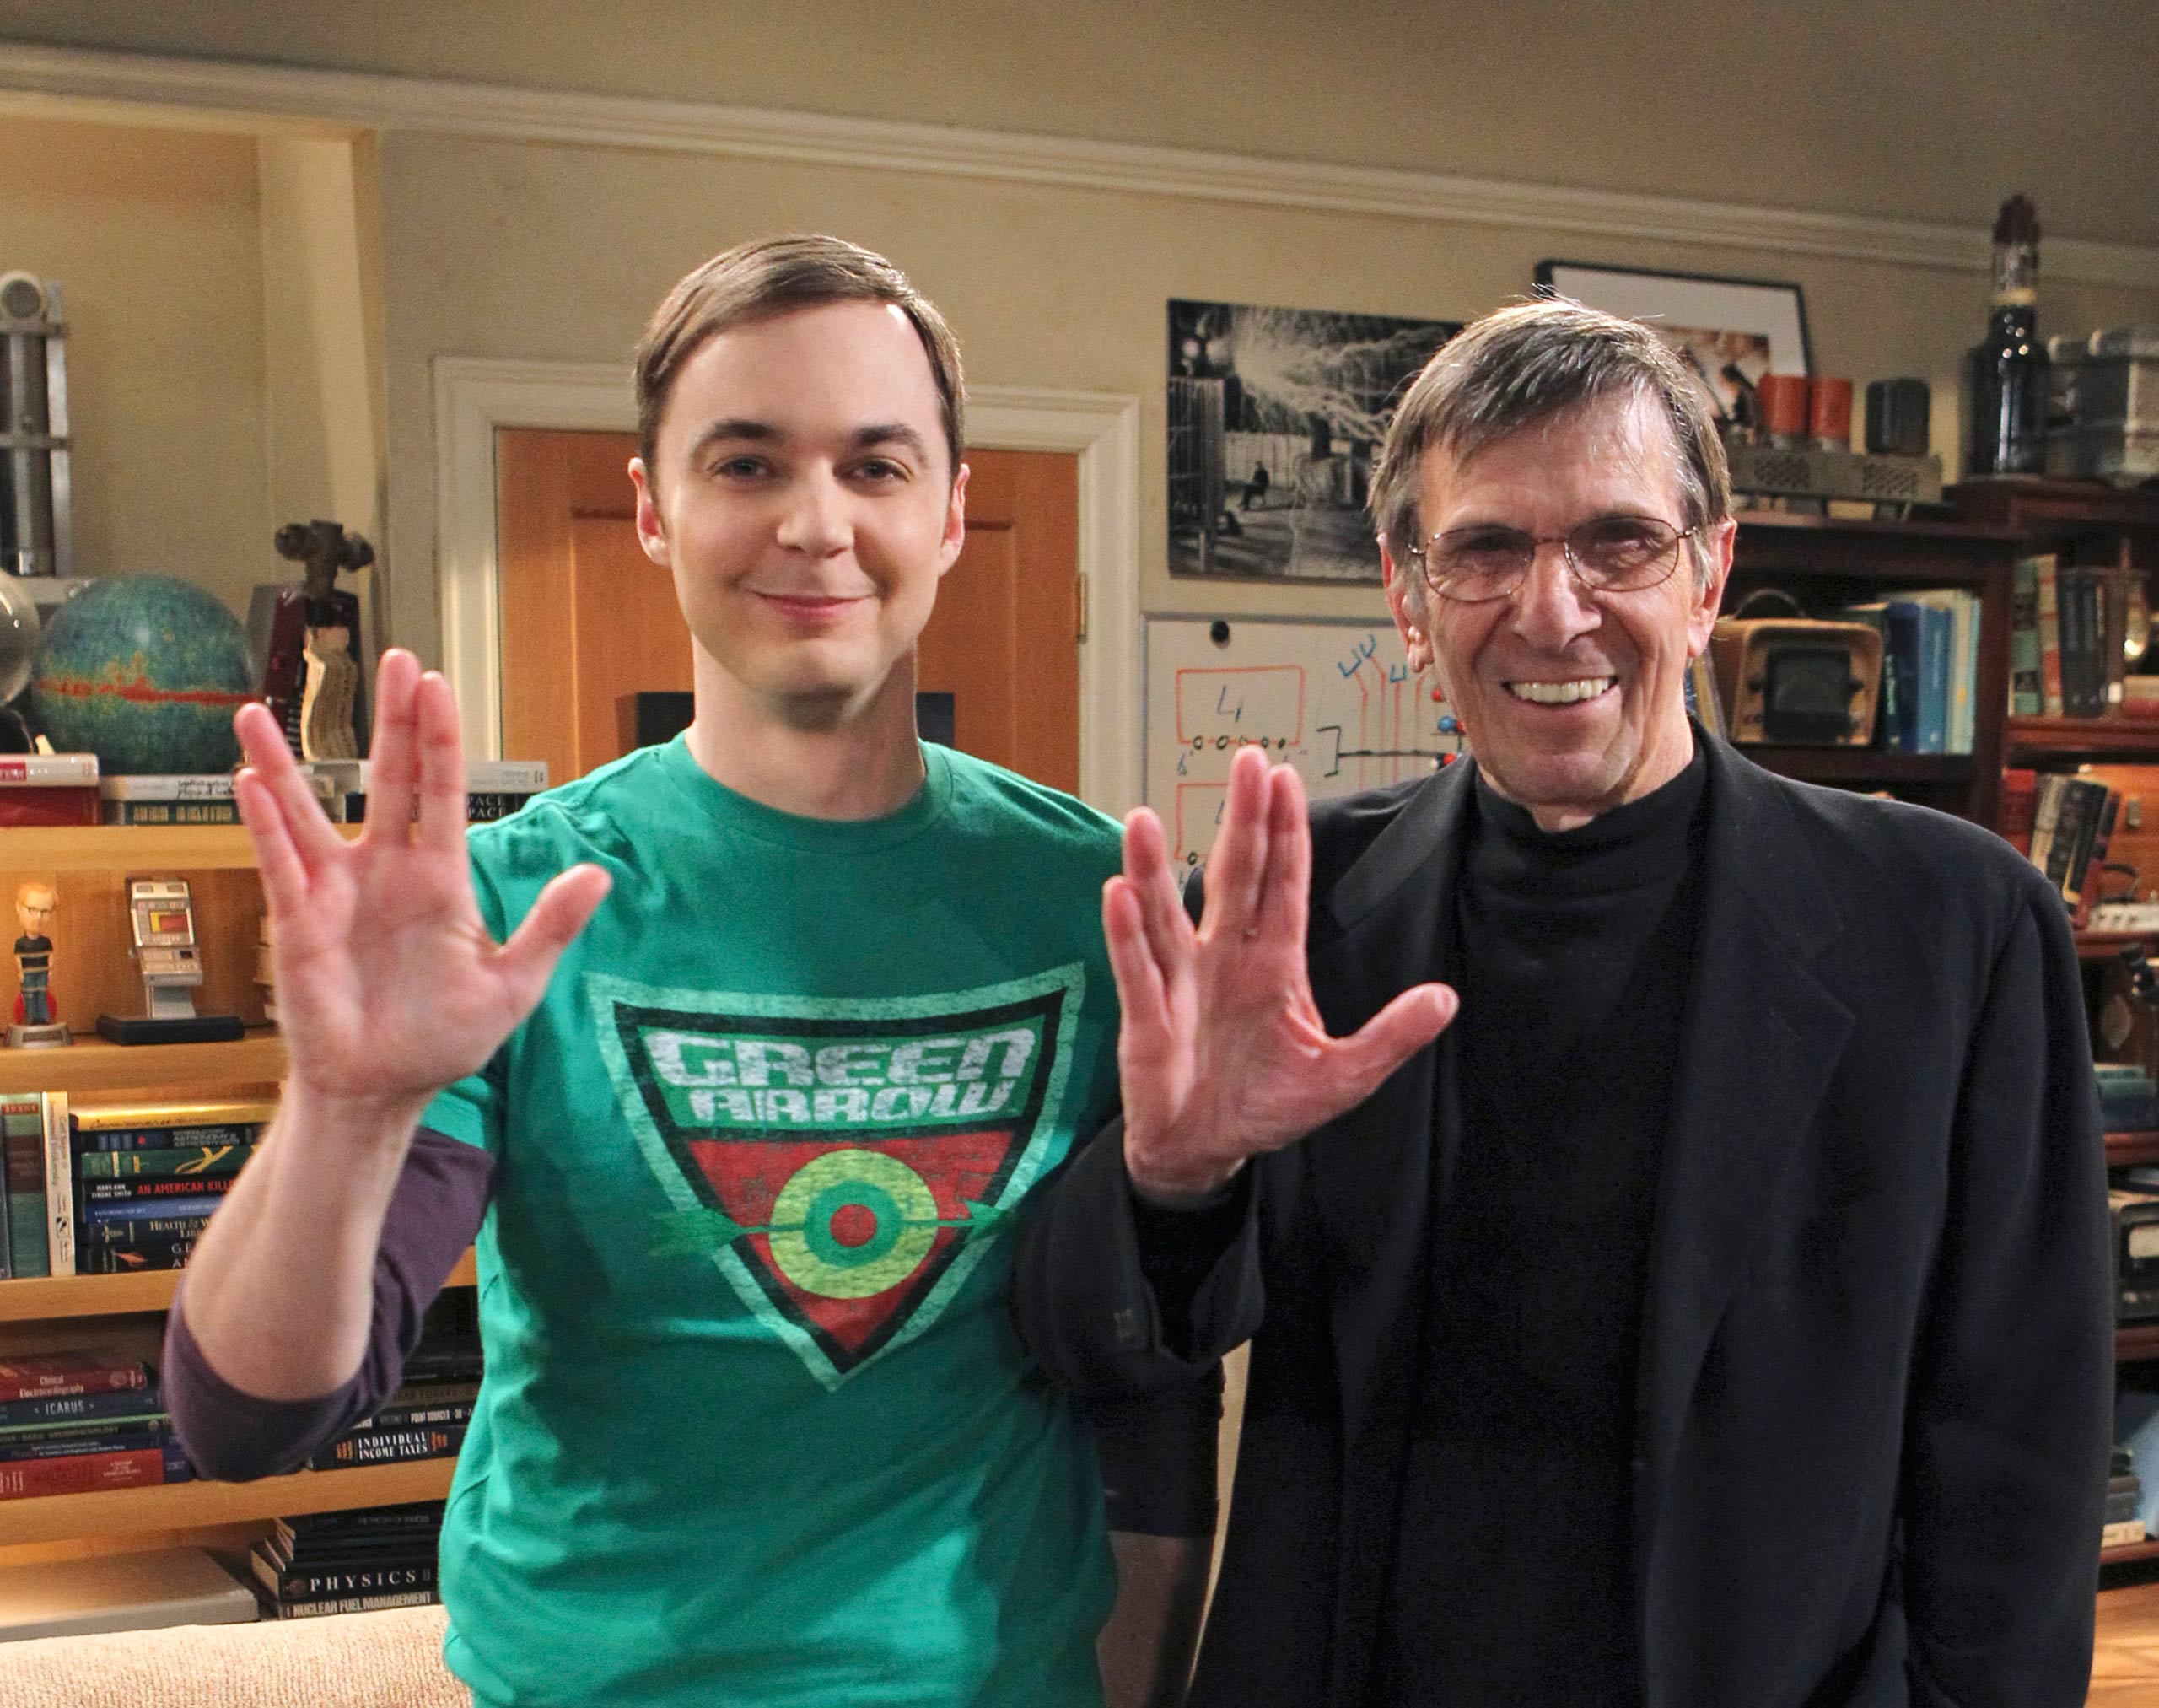 Leonard Nimoy guest stars in The Big Bang Theory.